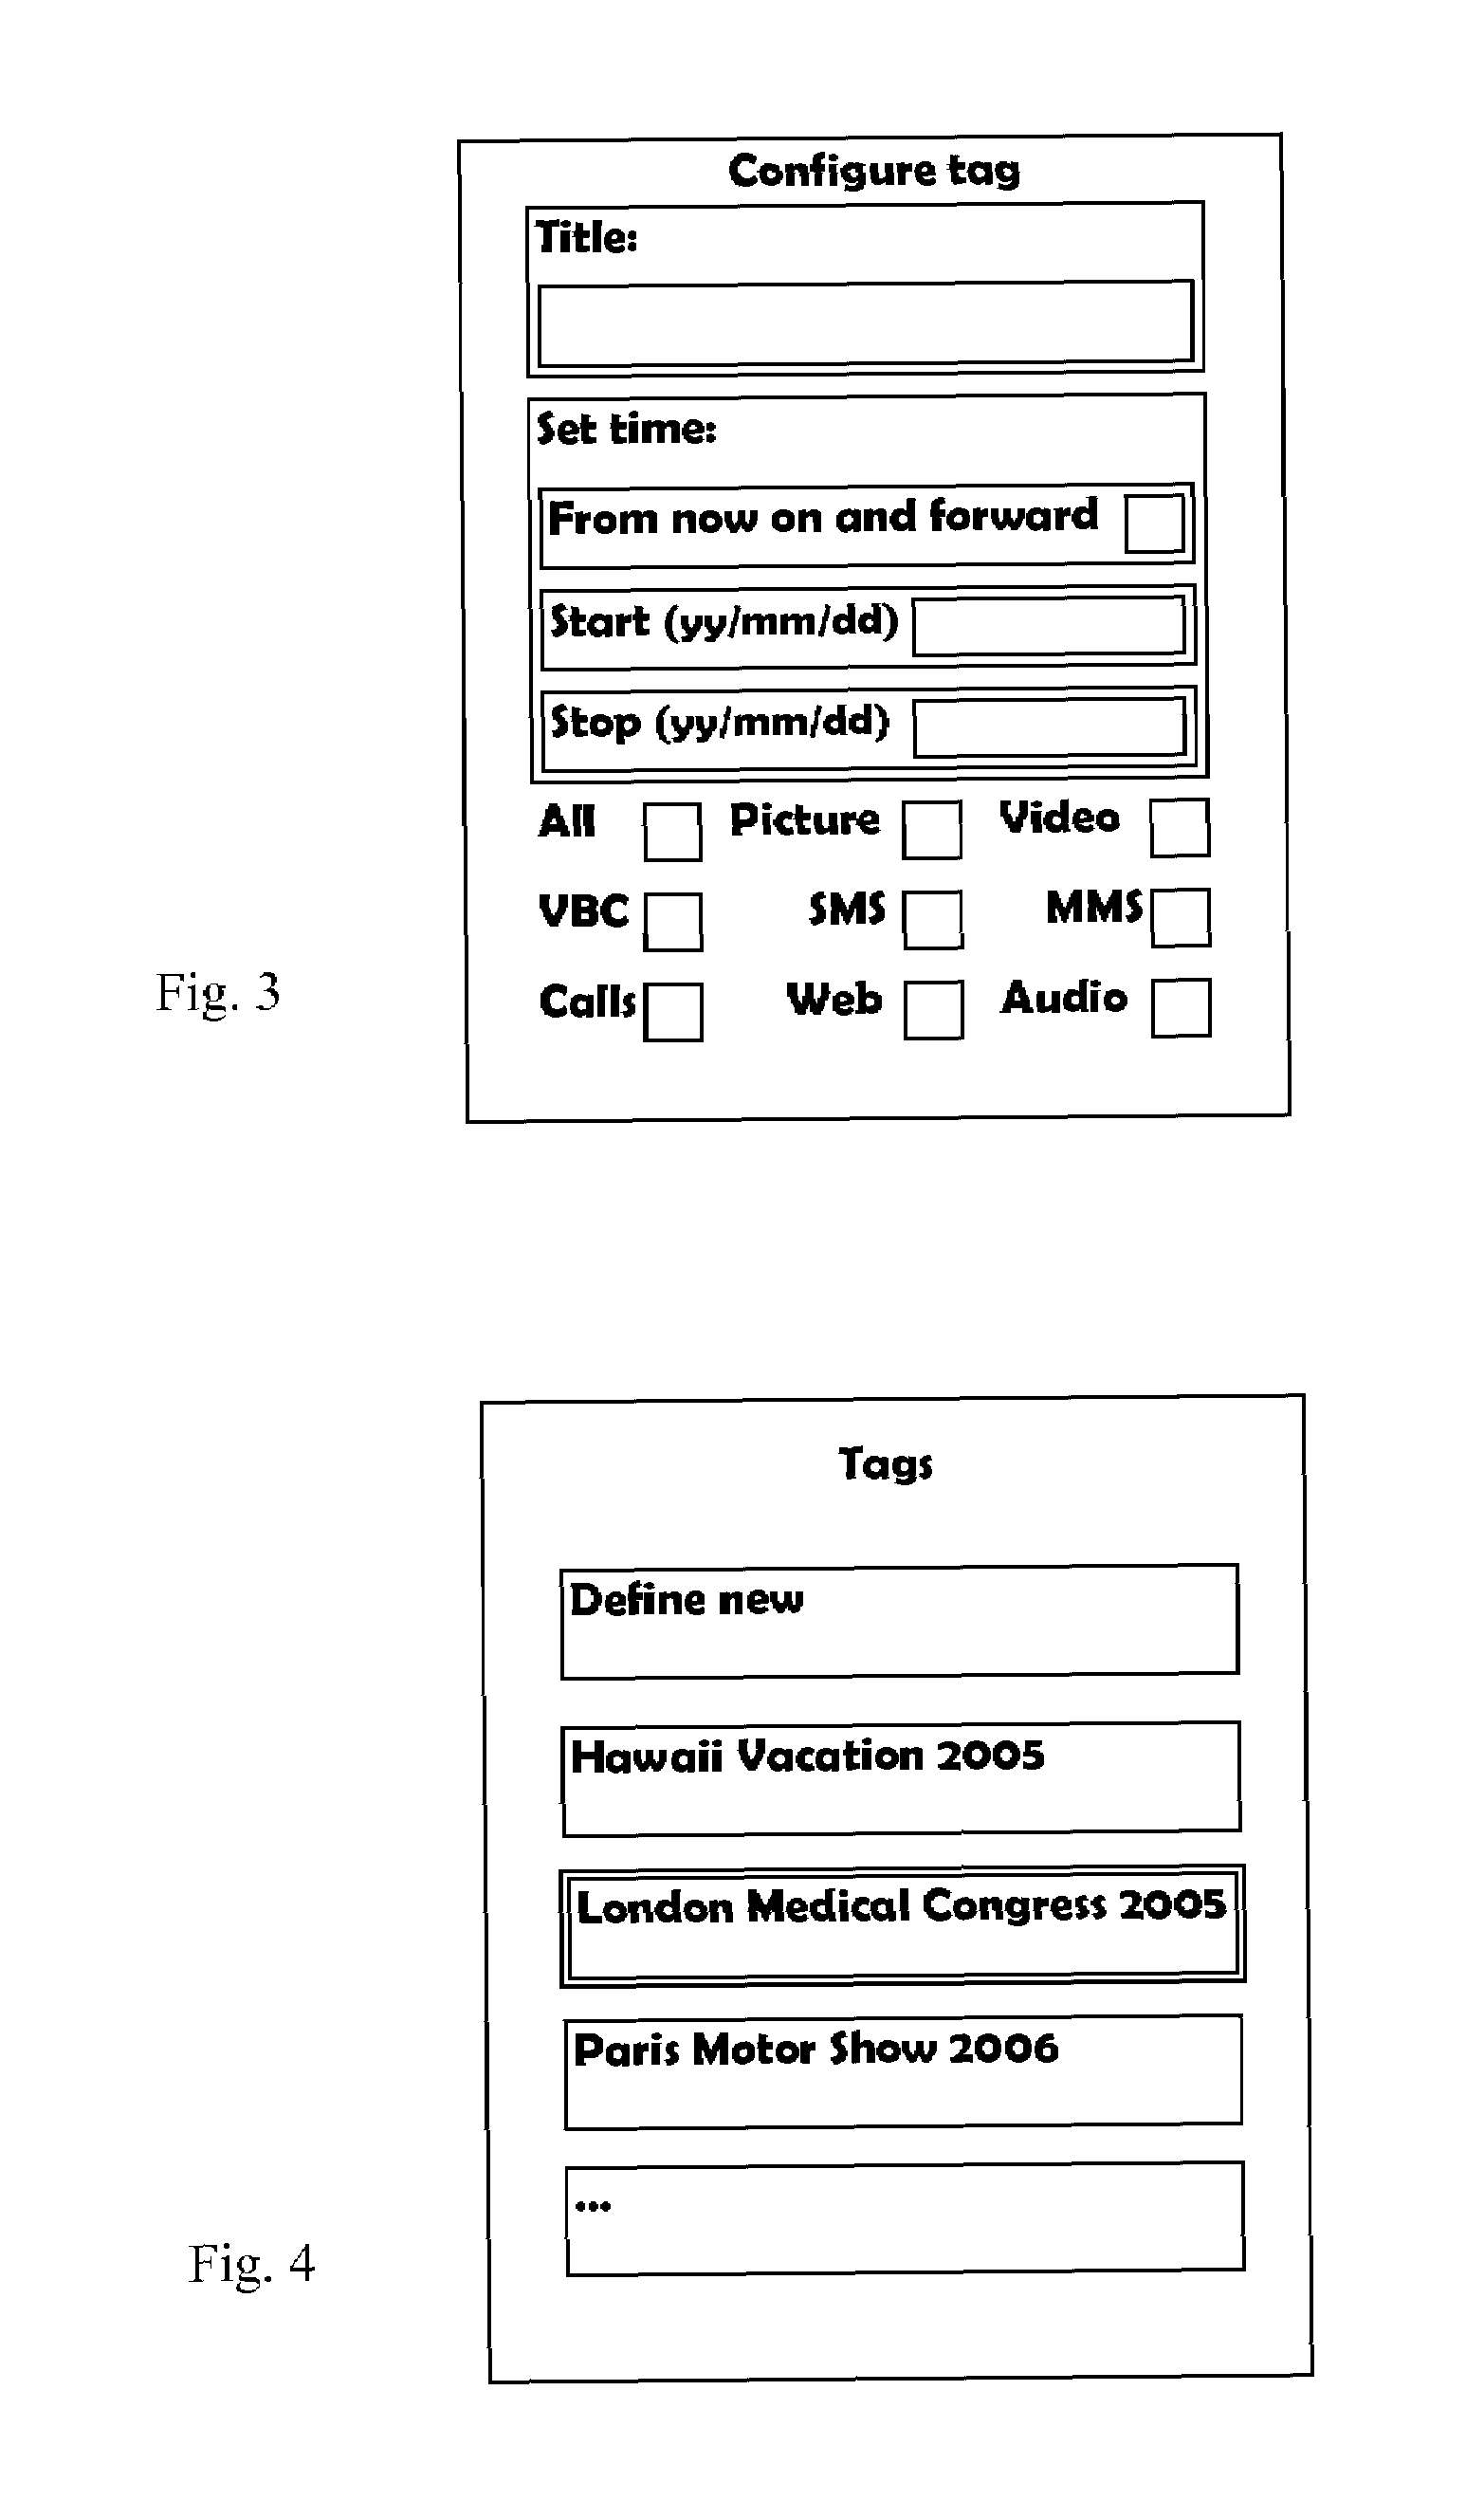 Method for storing and accessing data